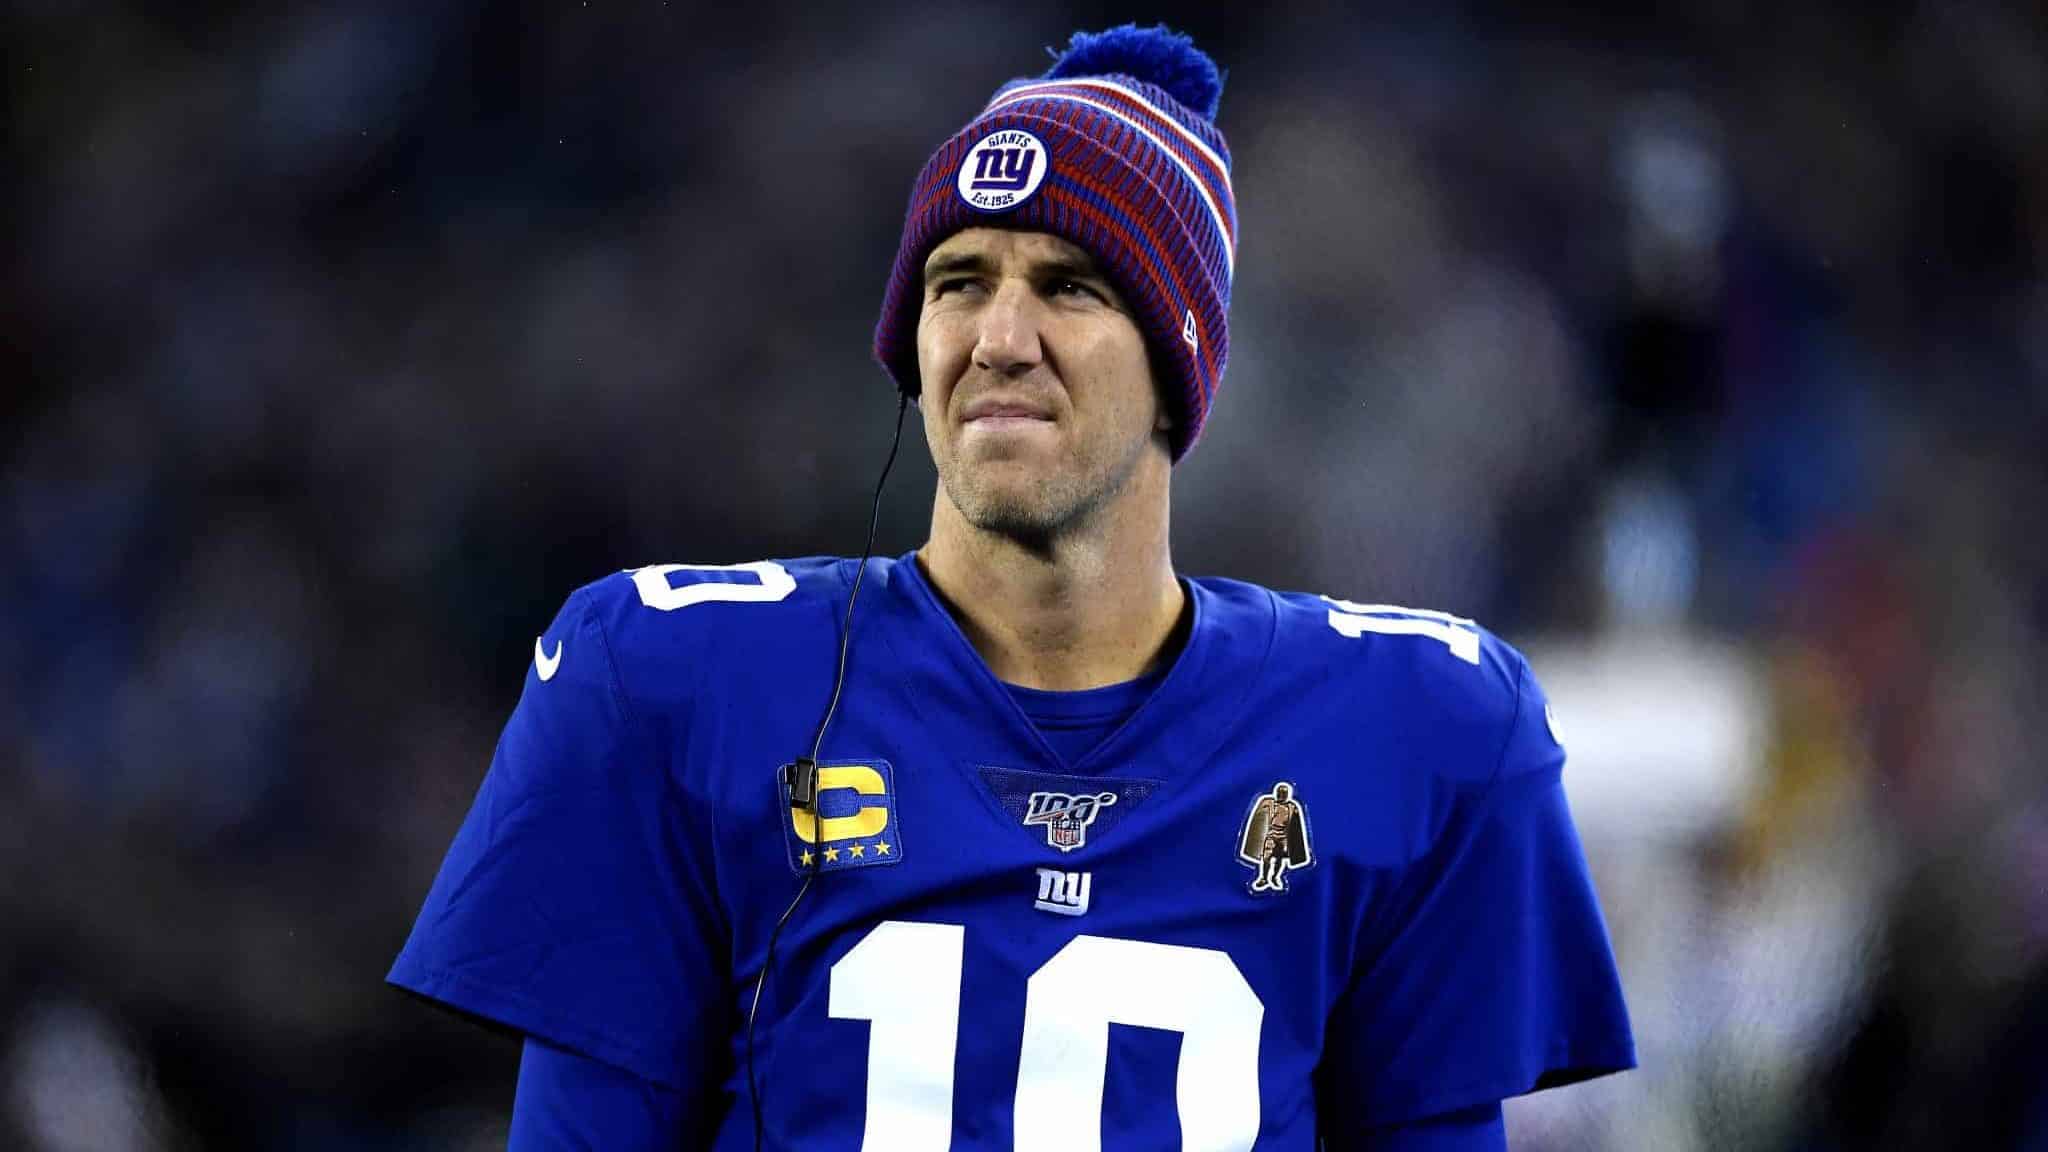 EAST RUTHERFORD, NEW JERSEY - DECEMBER 29: Eli Manning #10 of the New York Giants looks on from the sidelines against the Philadelphia Eagles during the first quarter in the game at MetLife Stadium on December 29, 2019 in East Rutherford, New Jersey.